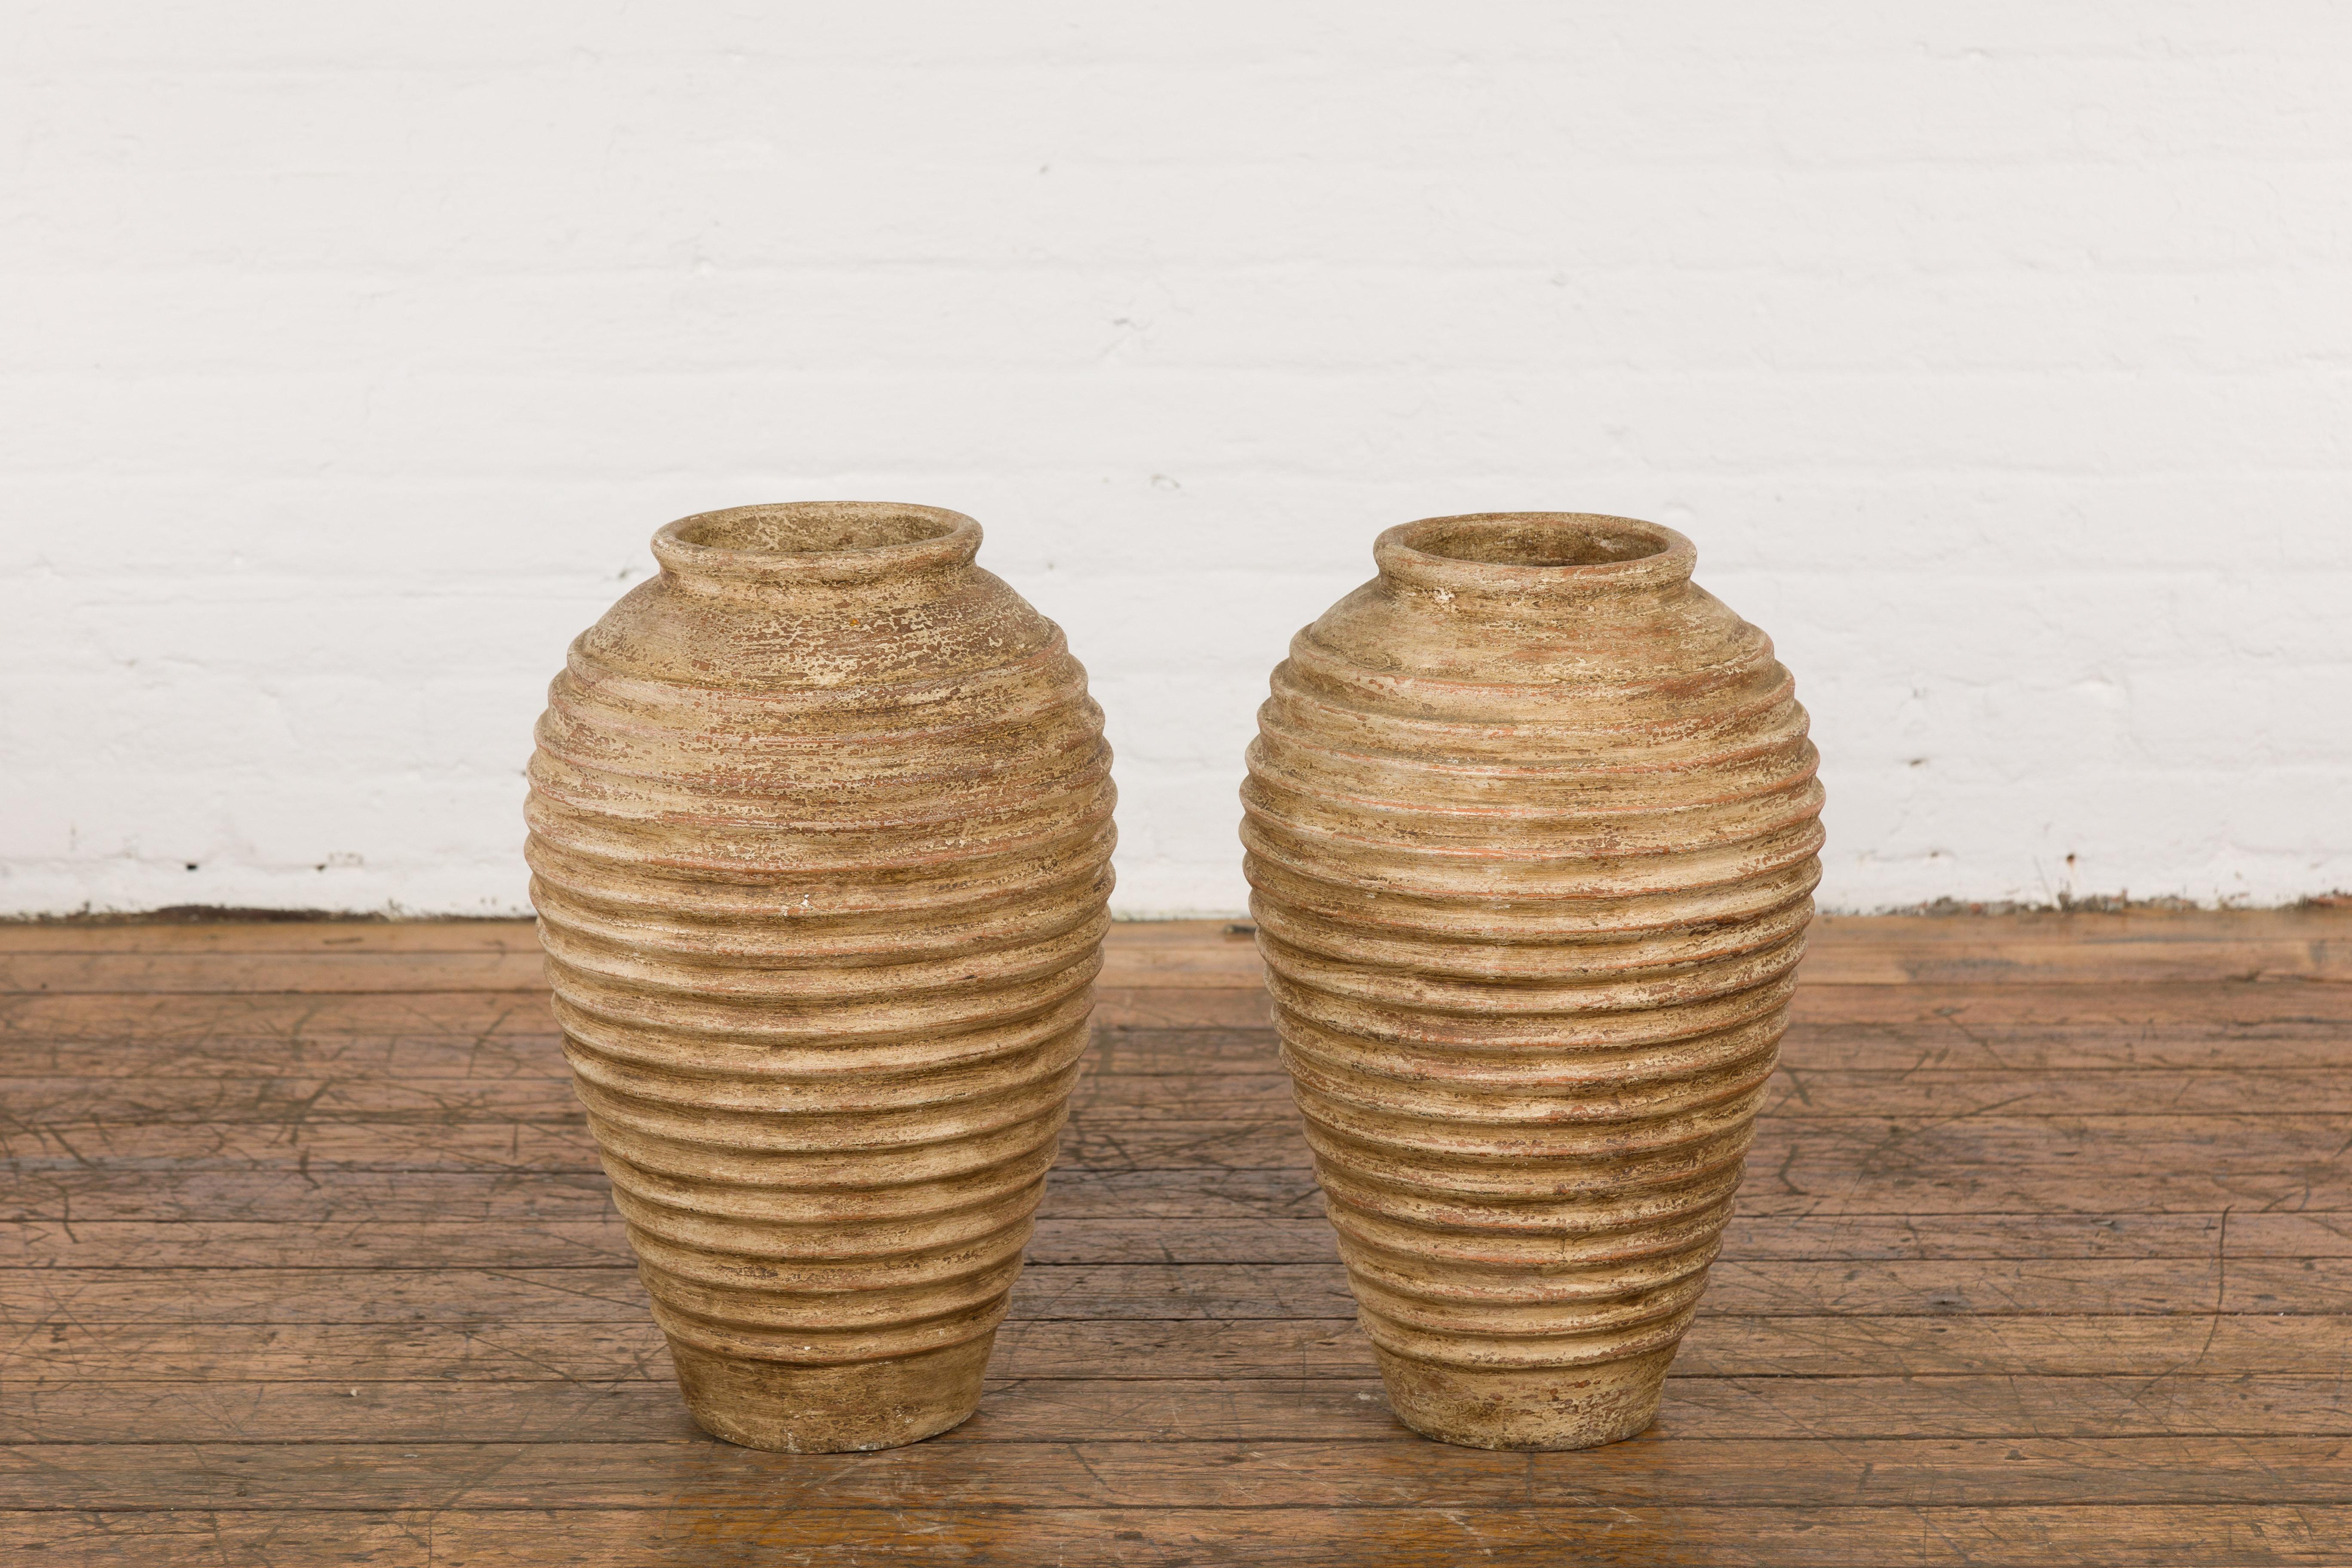 A near pair of vintage Thai storage vases from the mid 20th century with concentric circle design, rustic character and distressed patina. Exude a sense of rustic charm with this near pair of vintage Thai storage vases, an embodiment of traditional